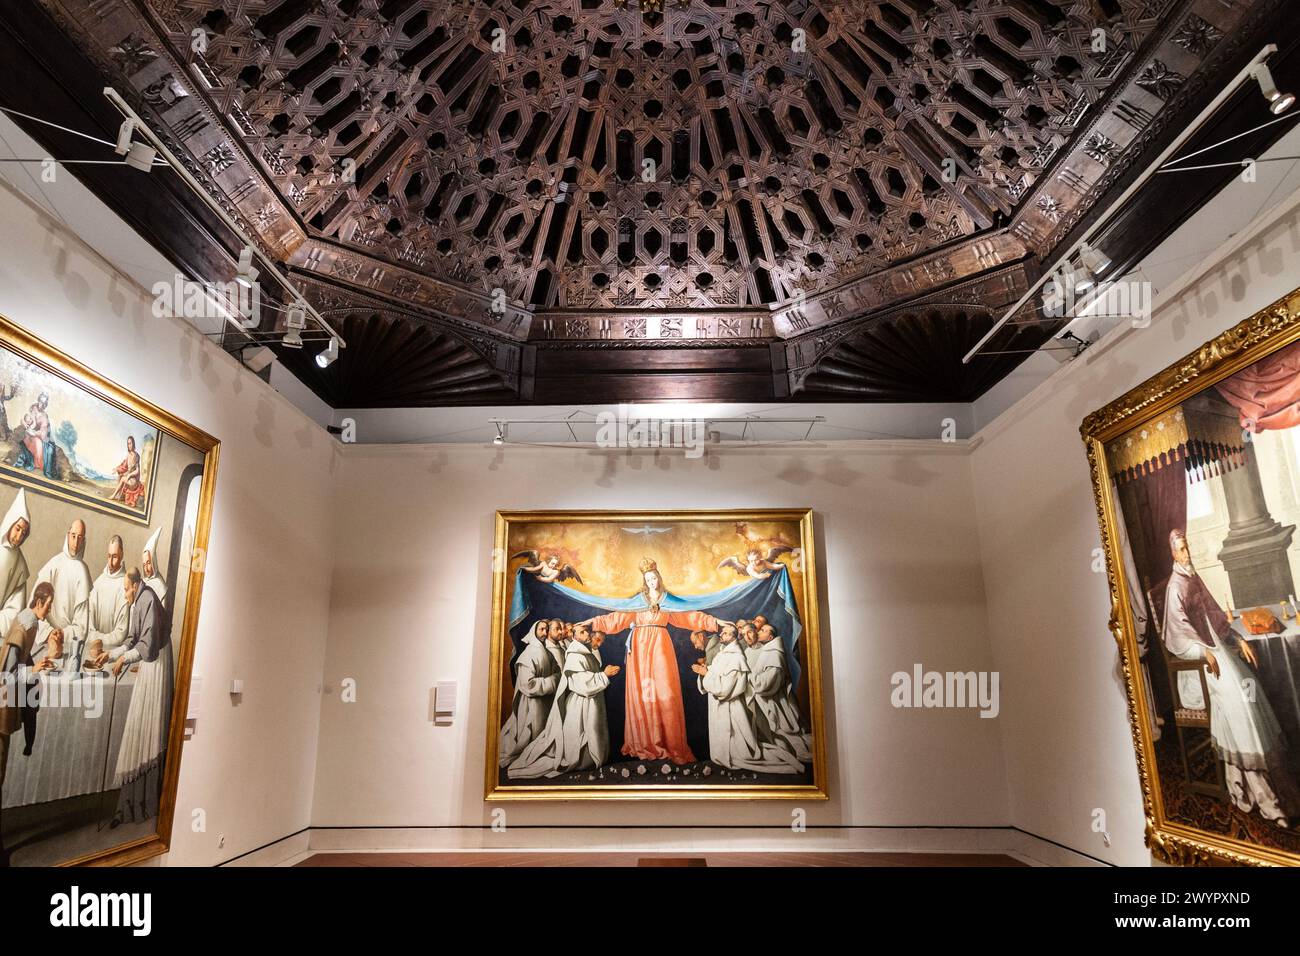 Interior of a painting gallery with ornate wooden carved ceiling at the Seville Museum of Fine Arts, Seville, Spain Stock Photo